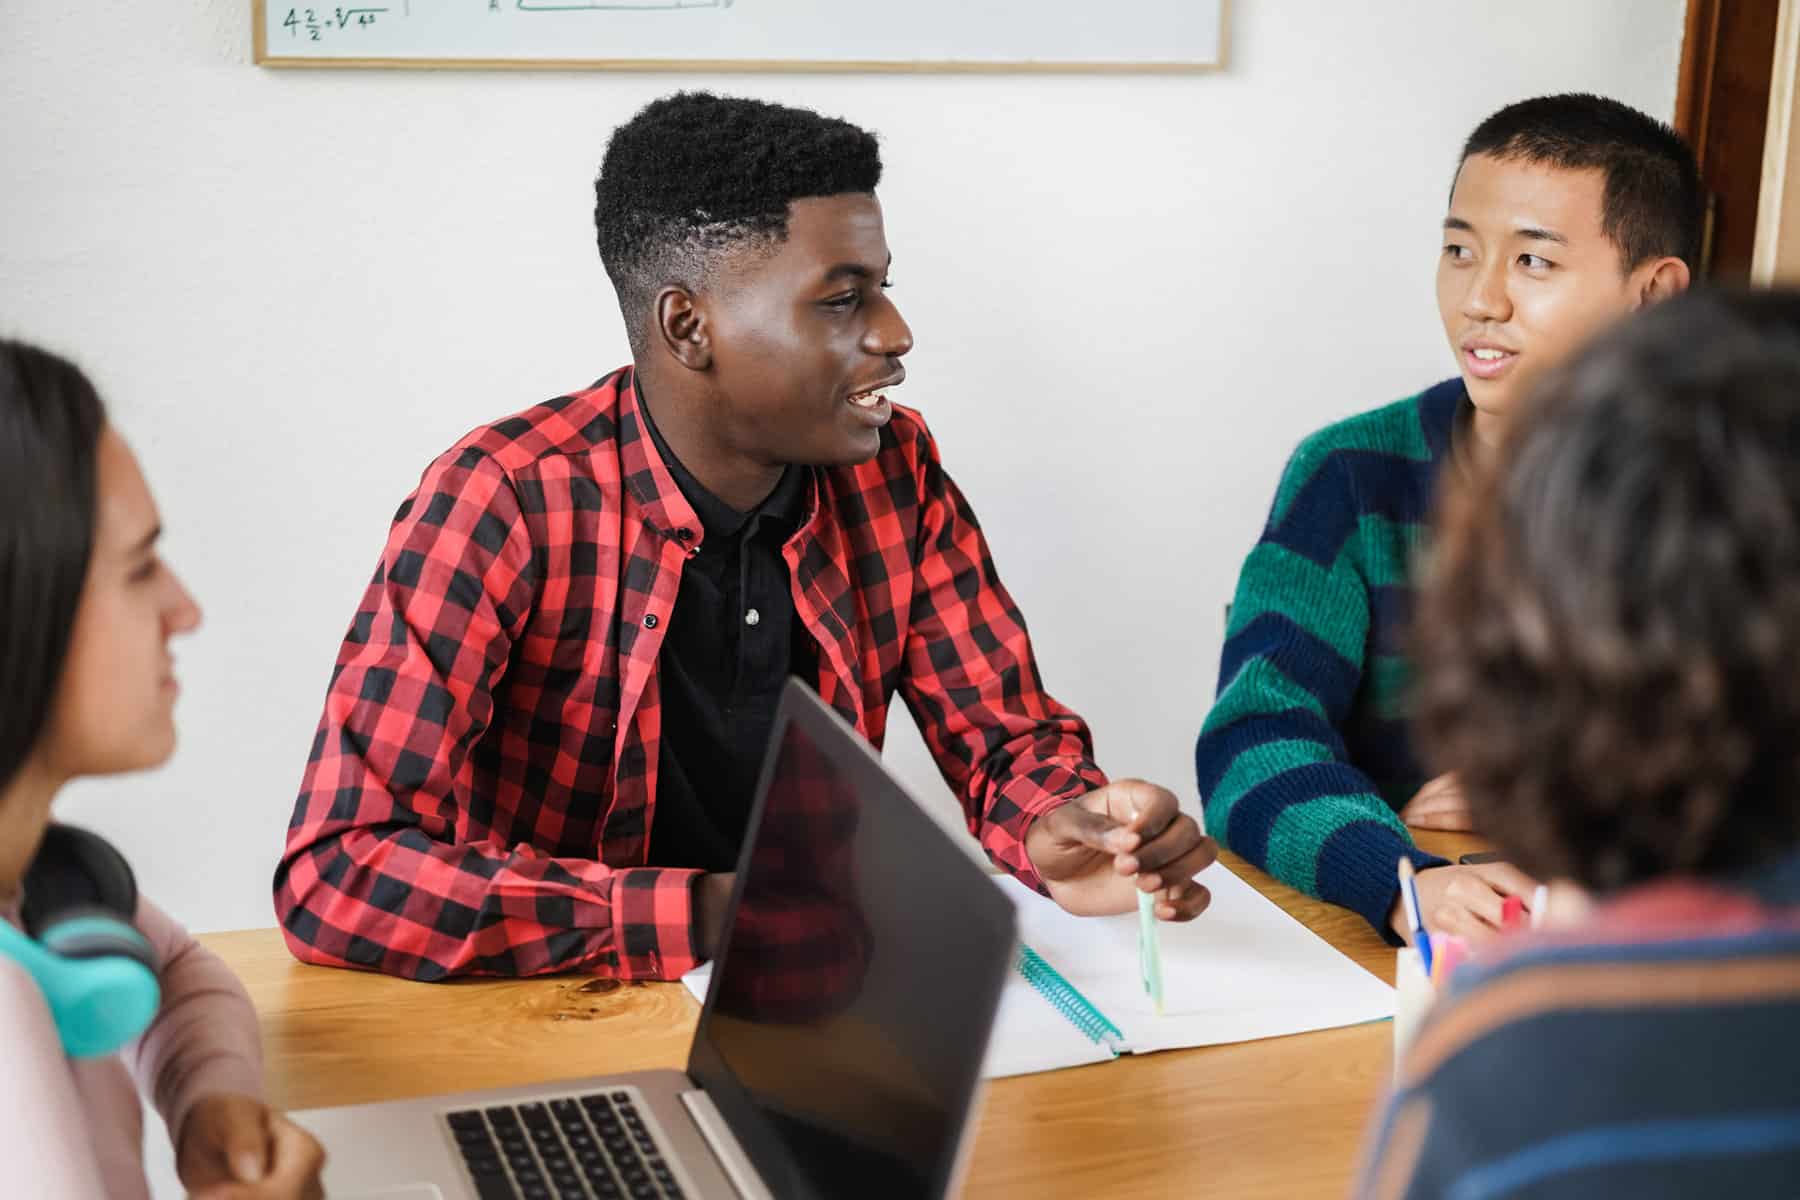 Multiracial students using laptop computer for project research while studying together at school - Focus on african boy face